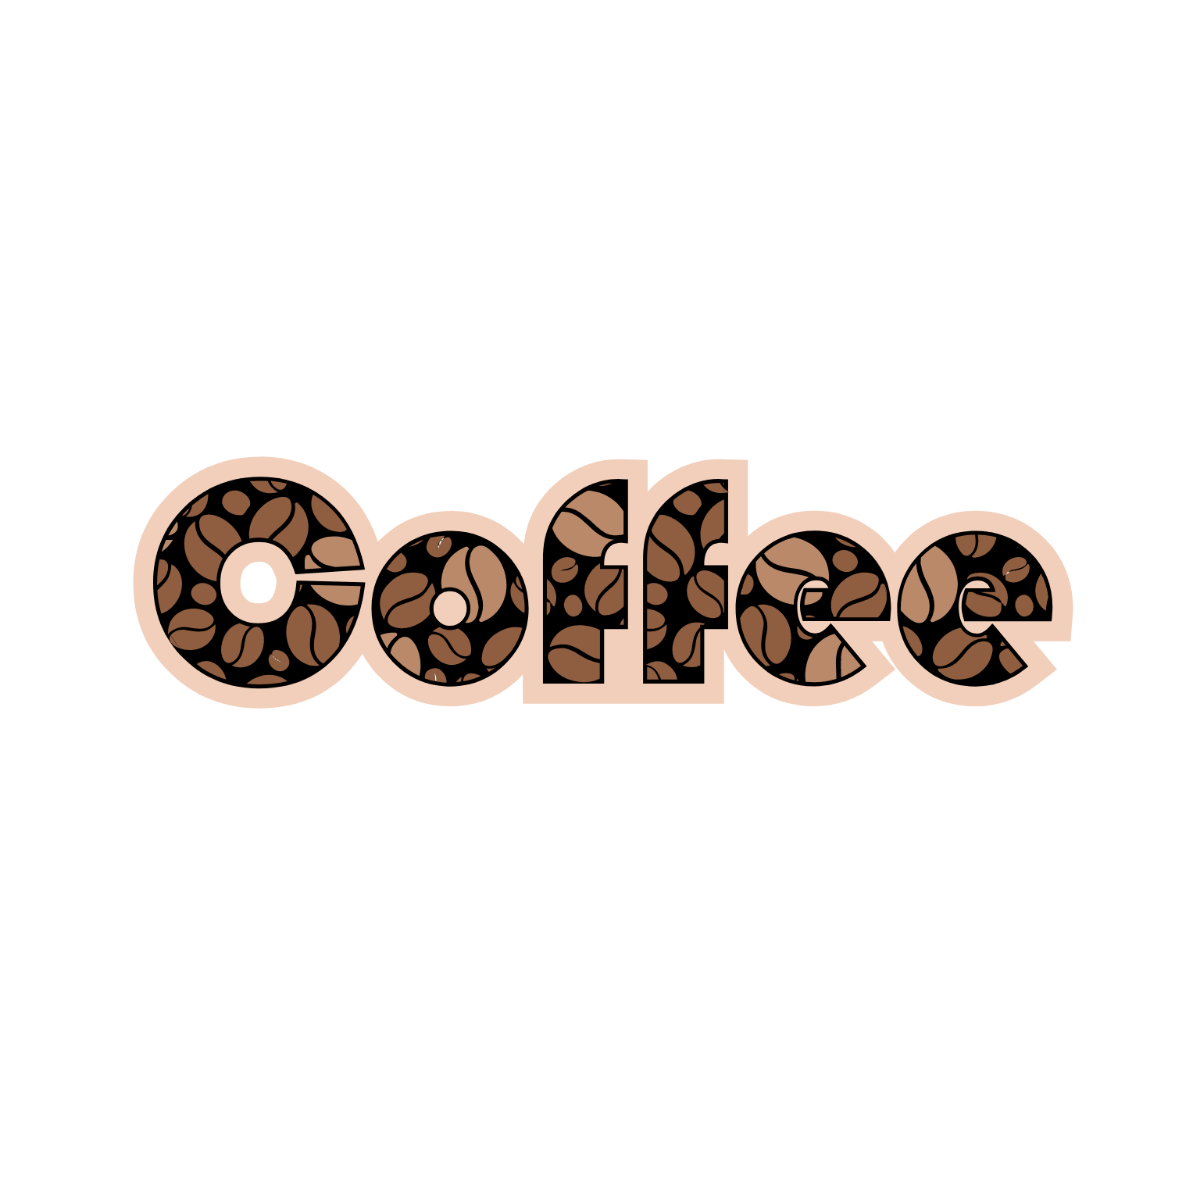 Coffee Text Effect Template